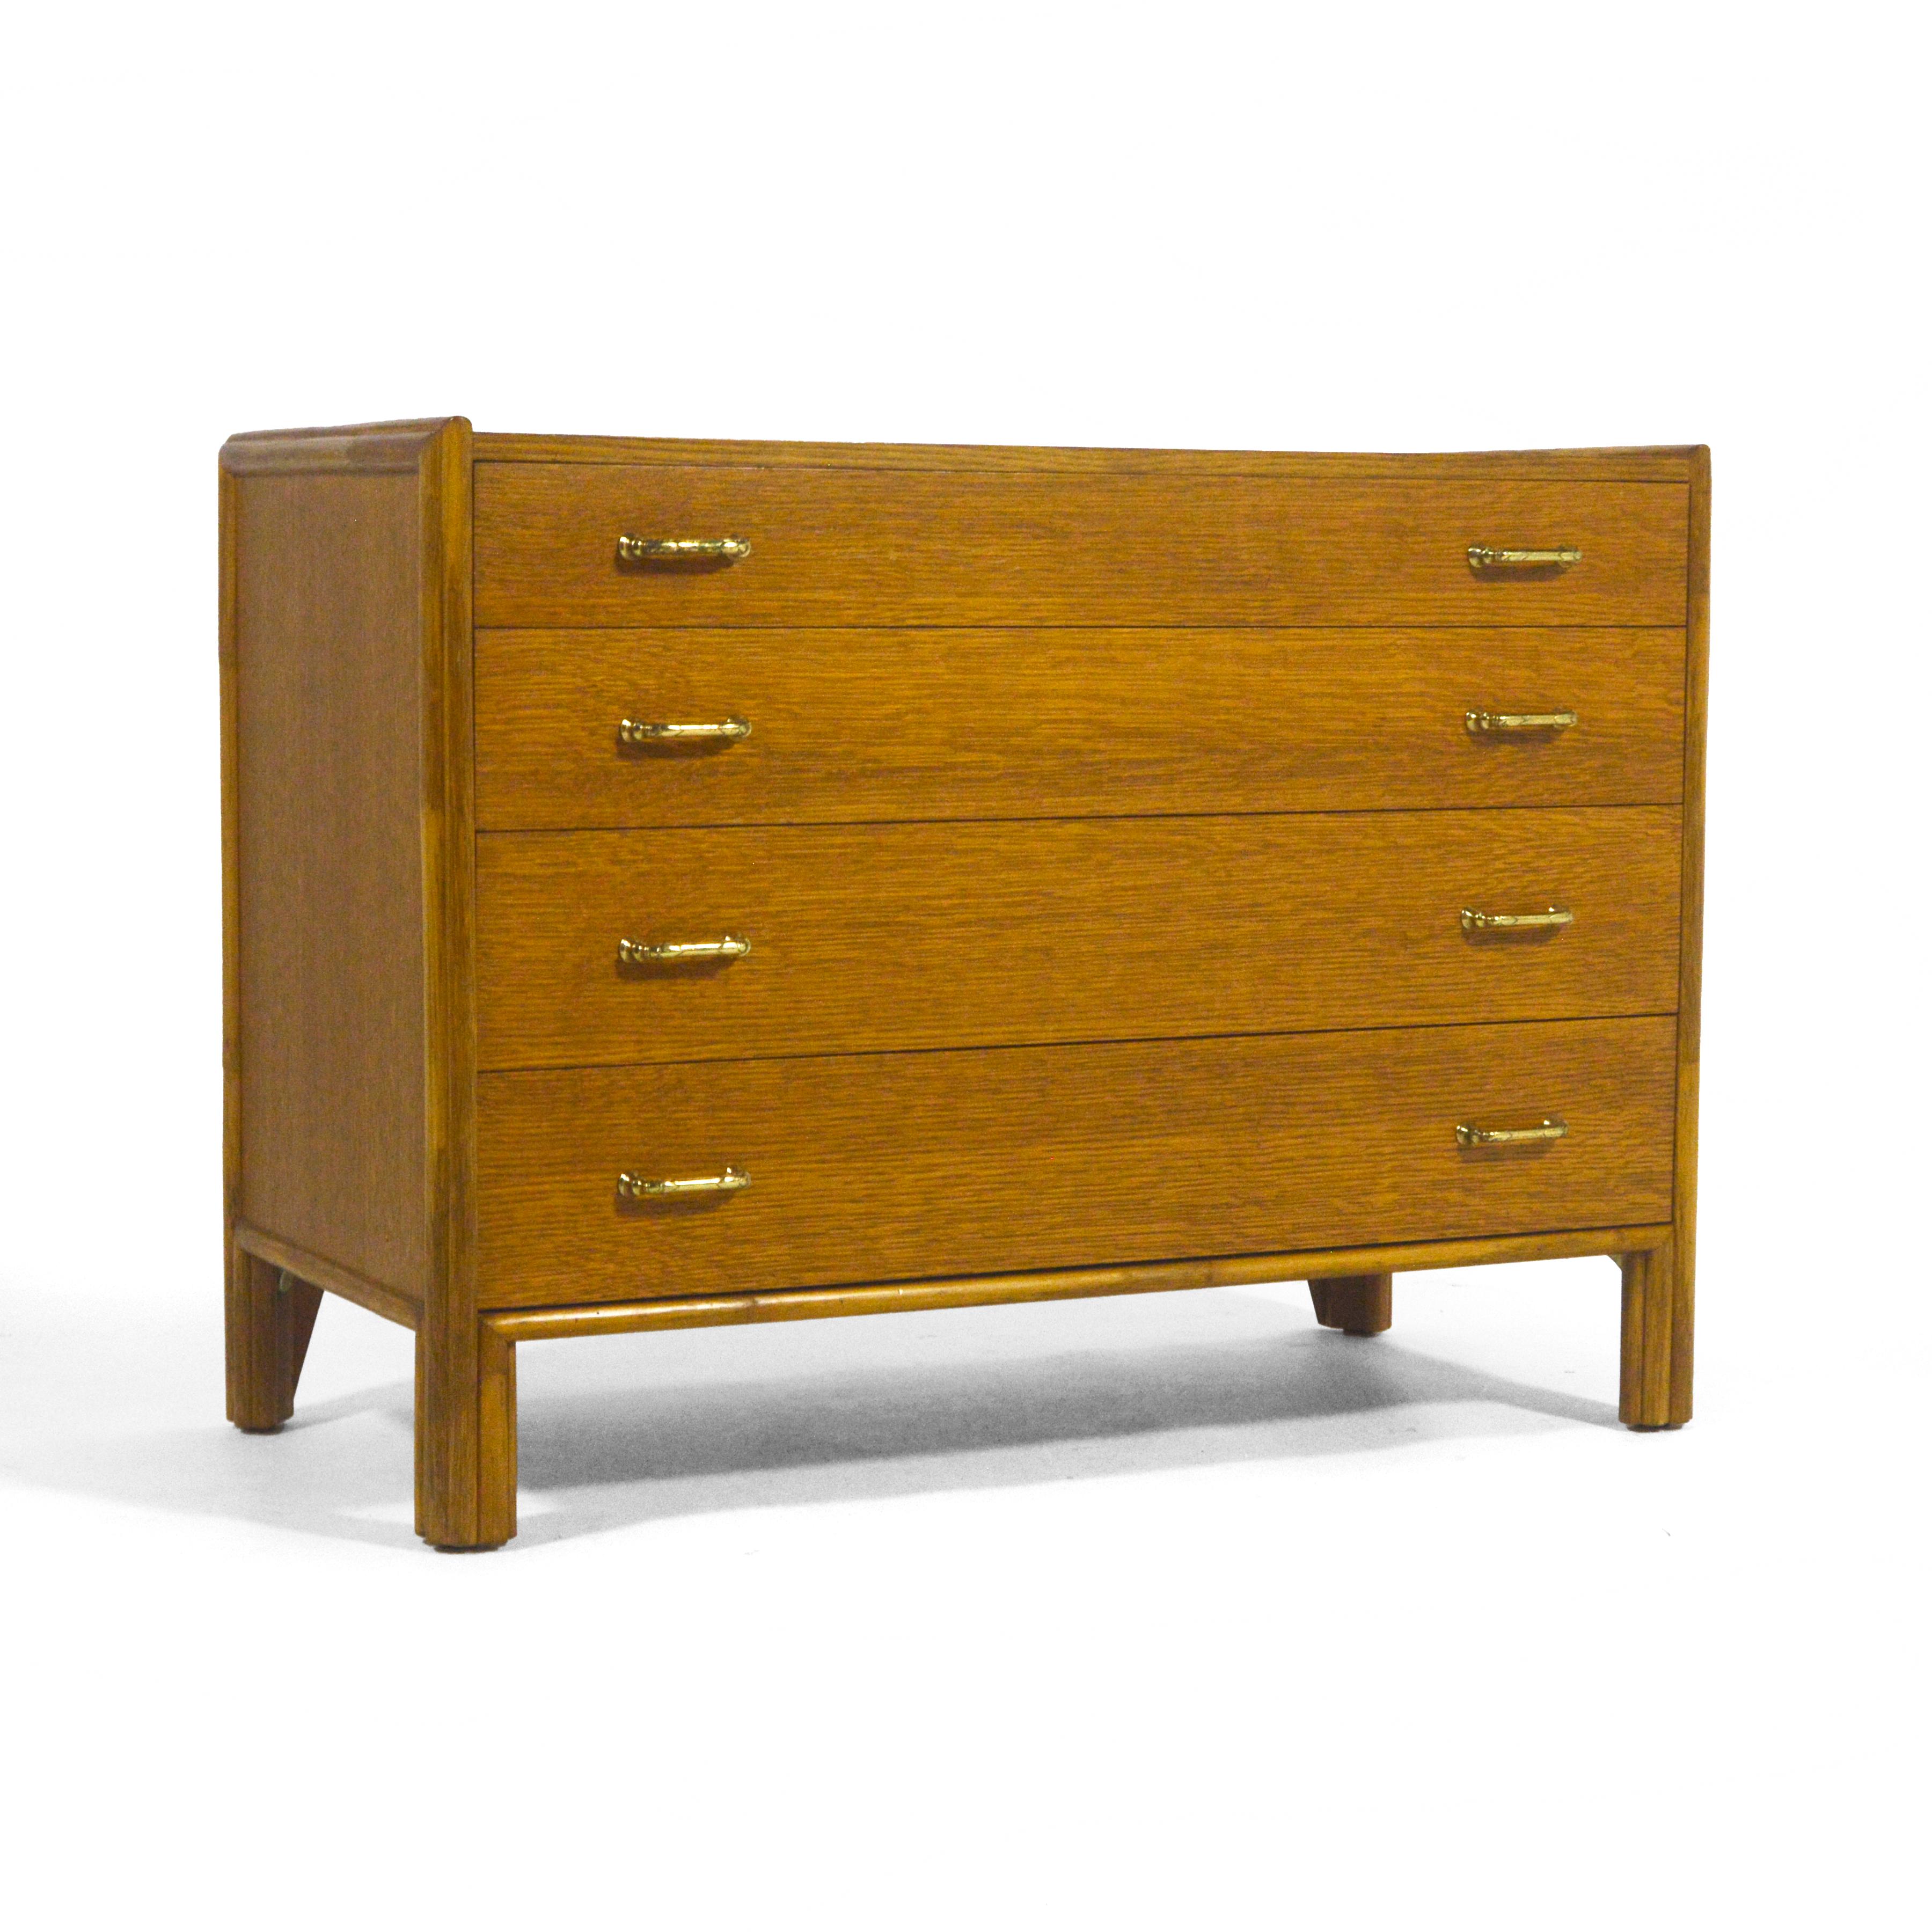 John McGuire designed chest in oak and rattan with brass pulls for McGuire of San Fransisco, the company he started with his wife Elinor.  McGuire furniture is made to last generations. Not only is the design tasteful and understated, the quality is